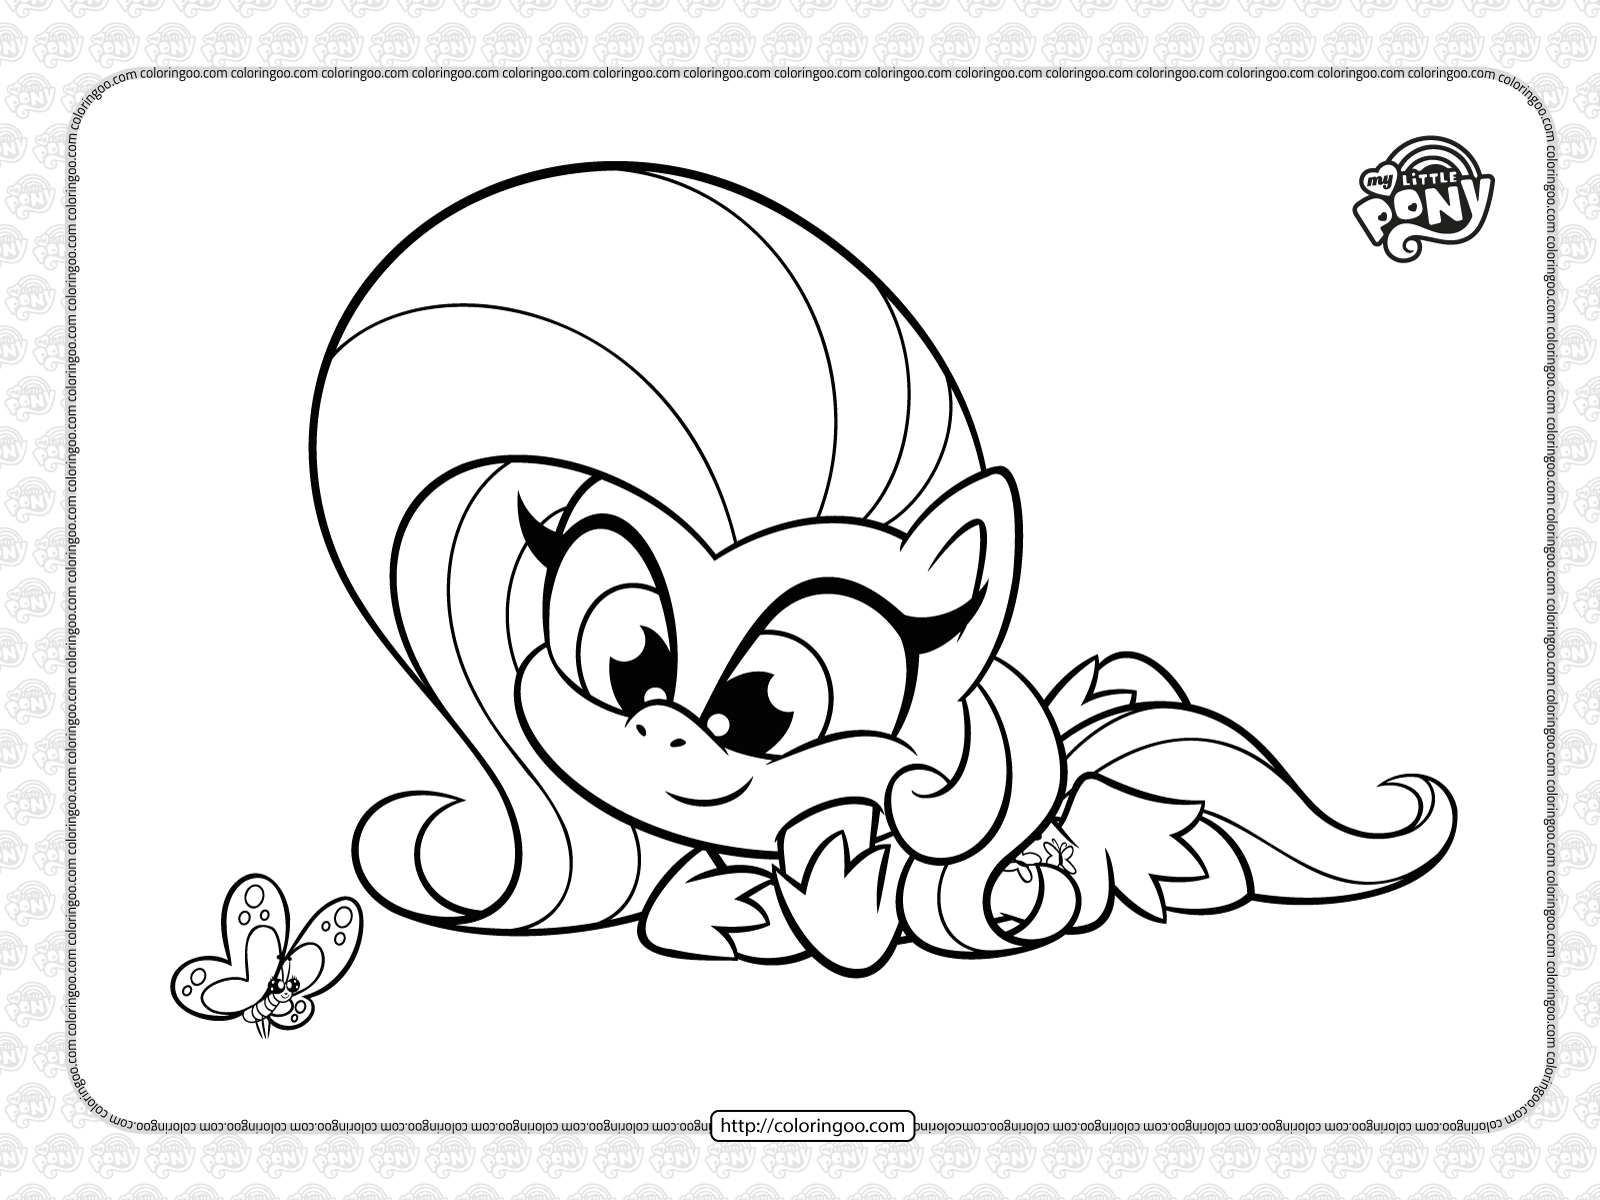 Mlp pony life fluttershy coloring page for kids by coloringoo on